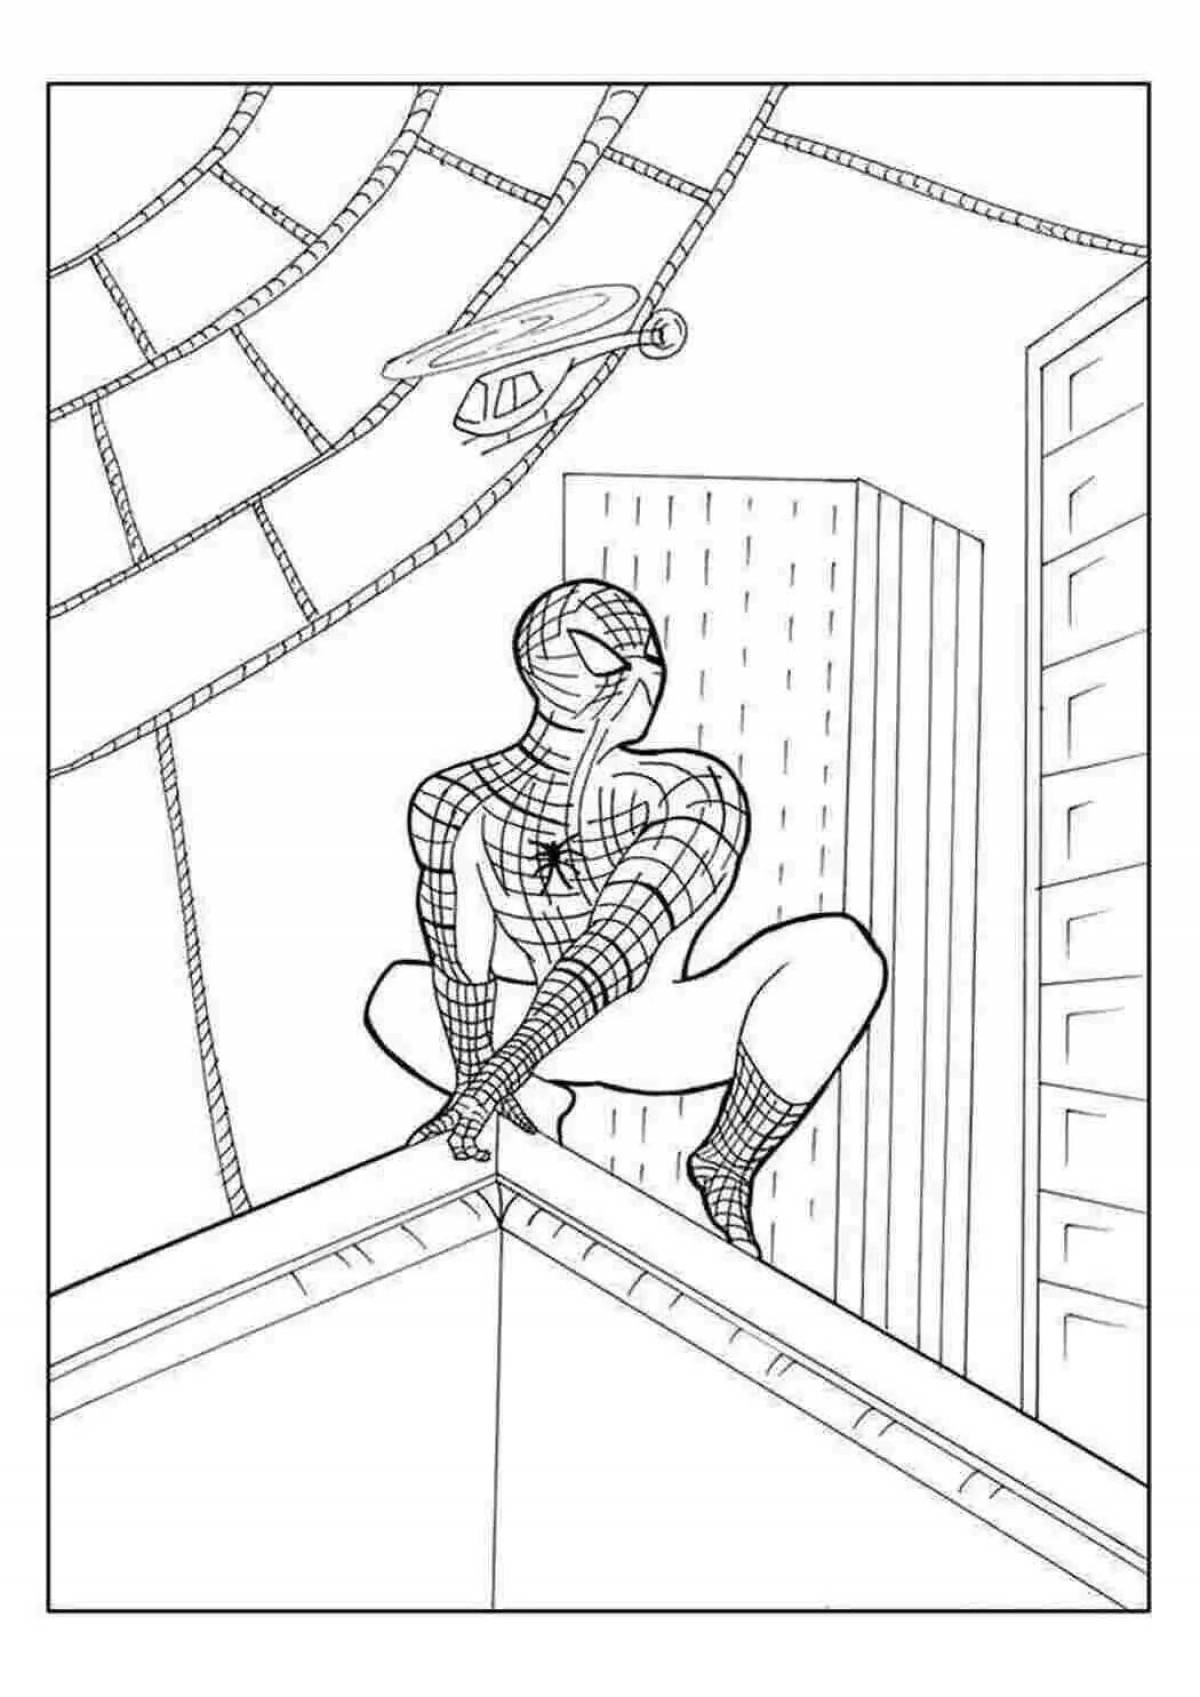 Peter parker spiderman dazzling coloring book